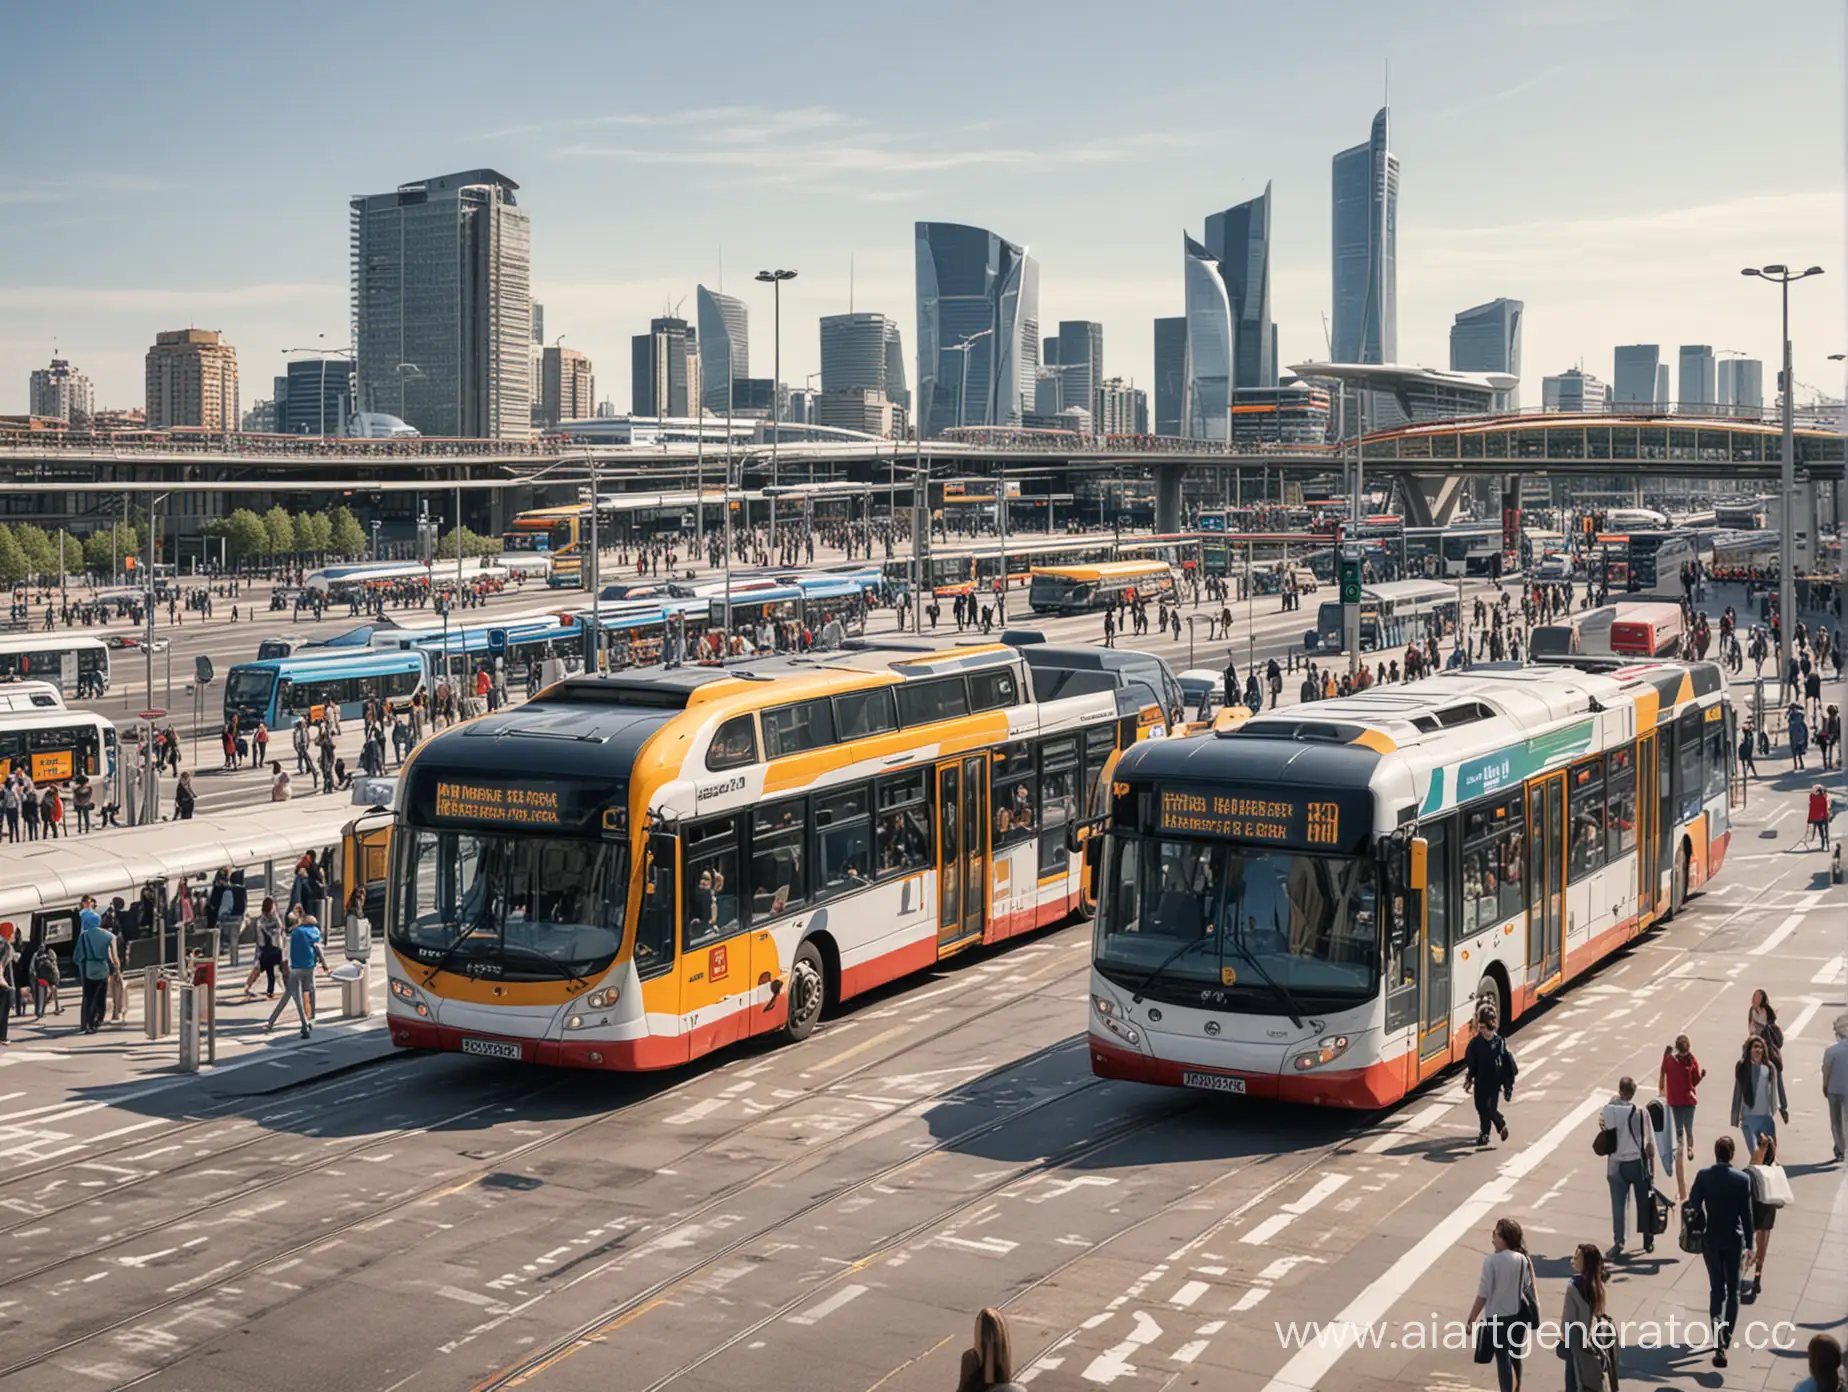 Vibrant-Urban-Transport-Hub-with-Buses-Trams-Metro-Bicycles-Trains-and-Airport-Terminal